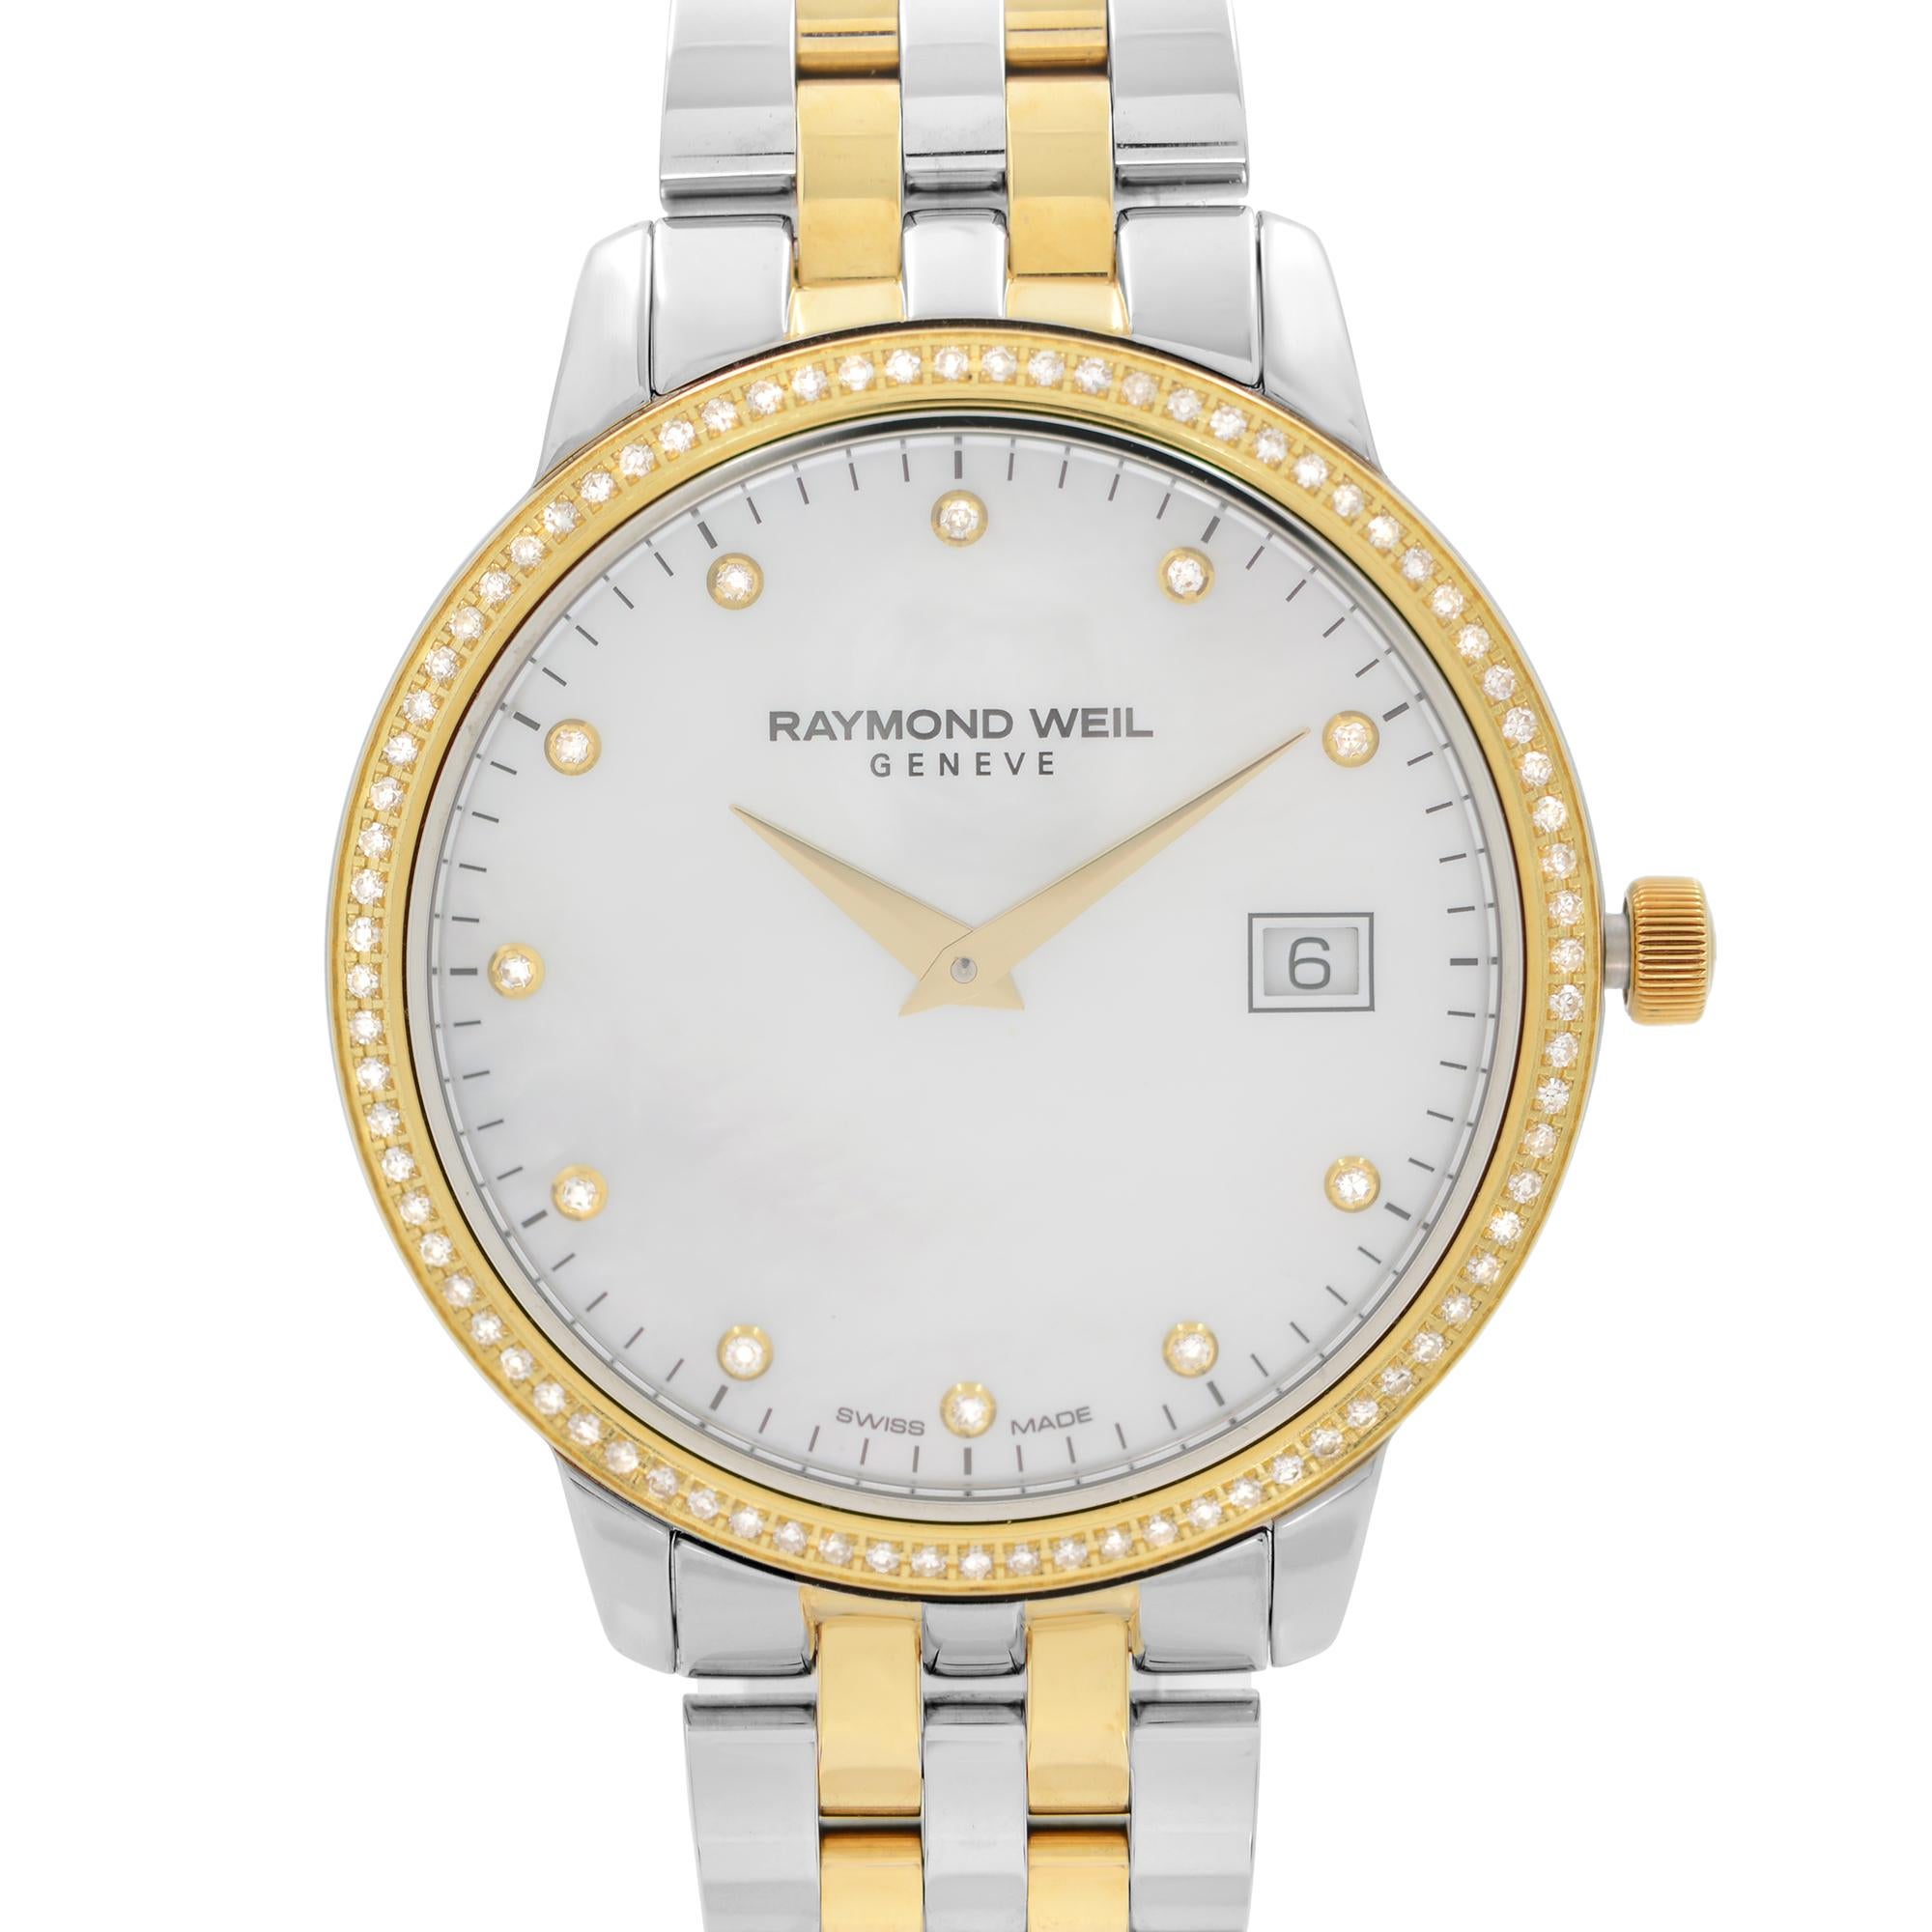 Unworn Raymond Weil Toccata Two-Tone Steel Diamond MOP Dial Ladies Watch. This Beautiful Timepiece Features: Stainless Steel Case with a Two-Tone (Silver and Gold-Plated) Stainless Steel Bracelet, Fixed Gold-Plated Bezel Set with Diamonds,